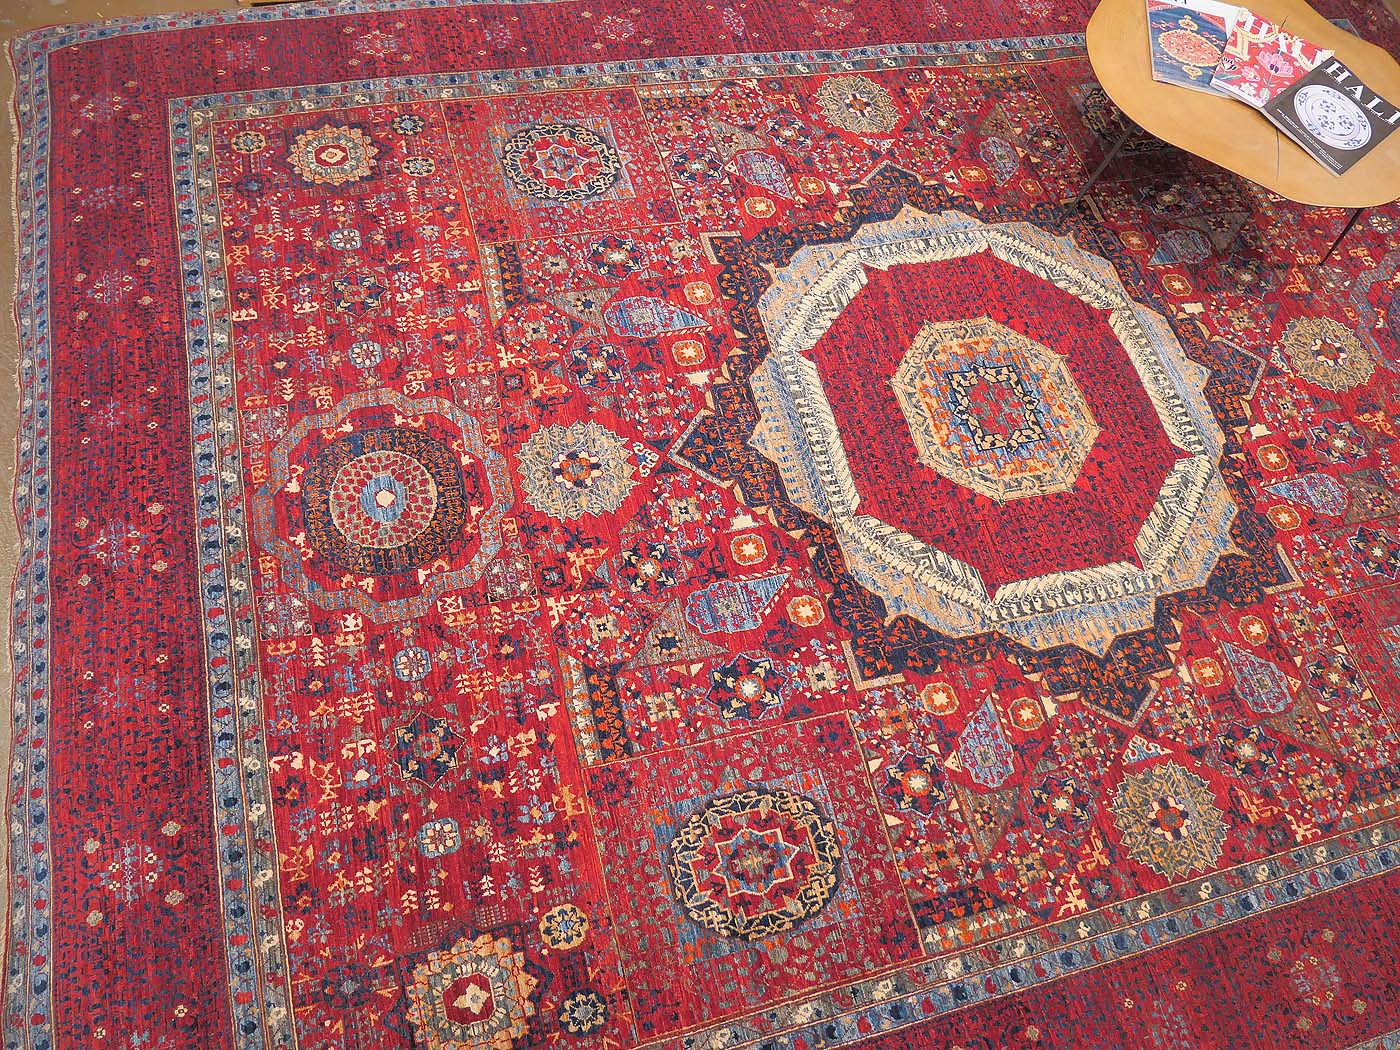 Finely Woven Mamluk Rug 9X12 At Nomad Rugs In San Francisco